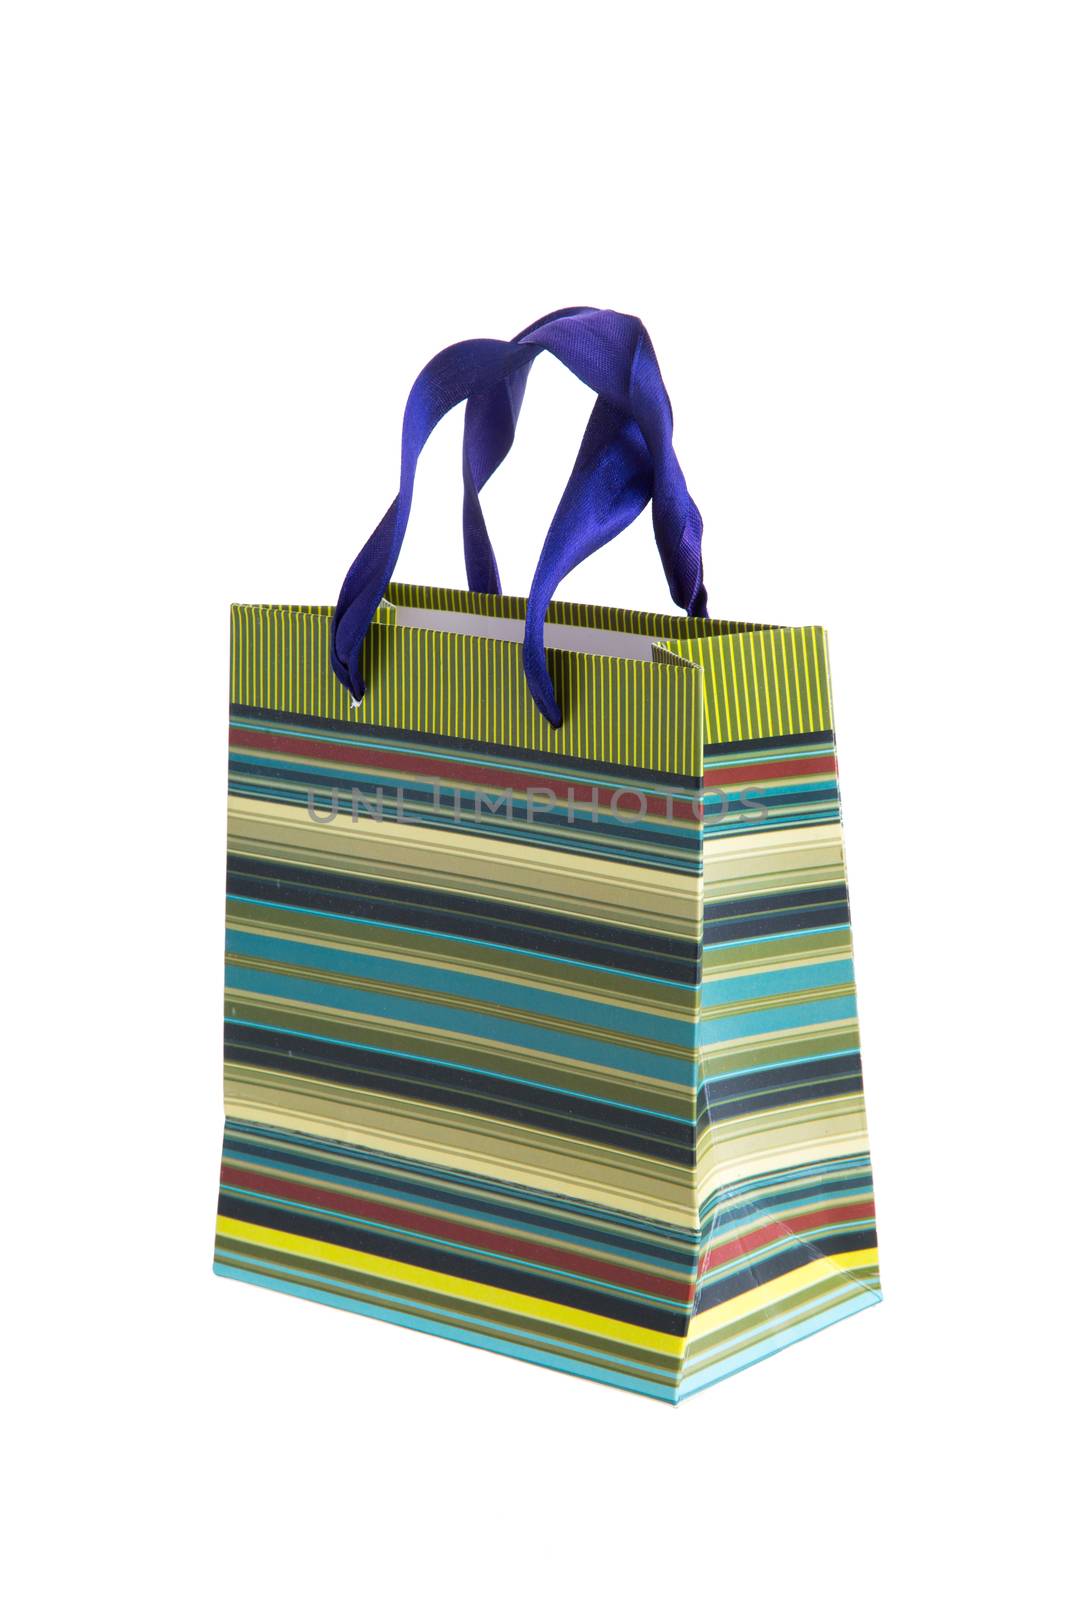 Paper shopping bags by tehcheesiong